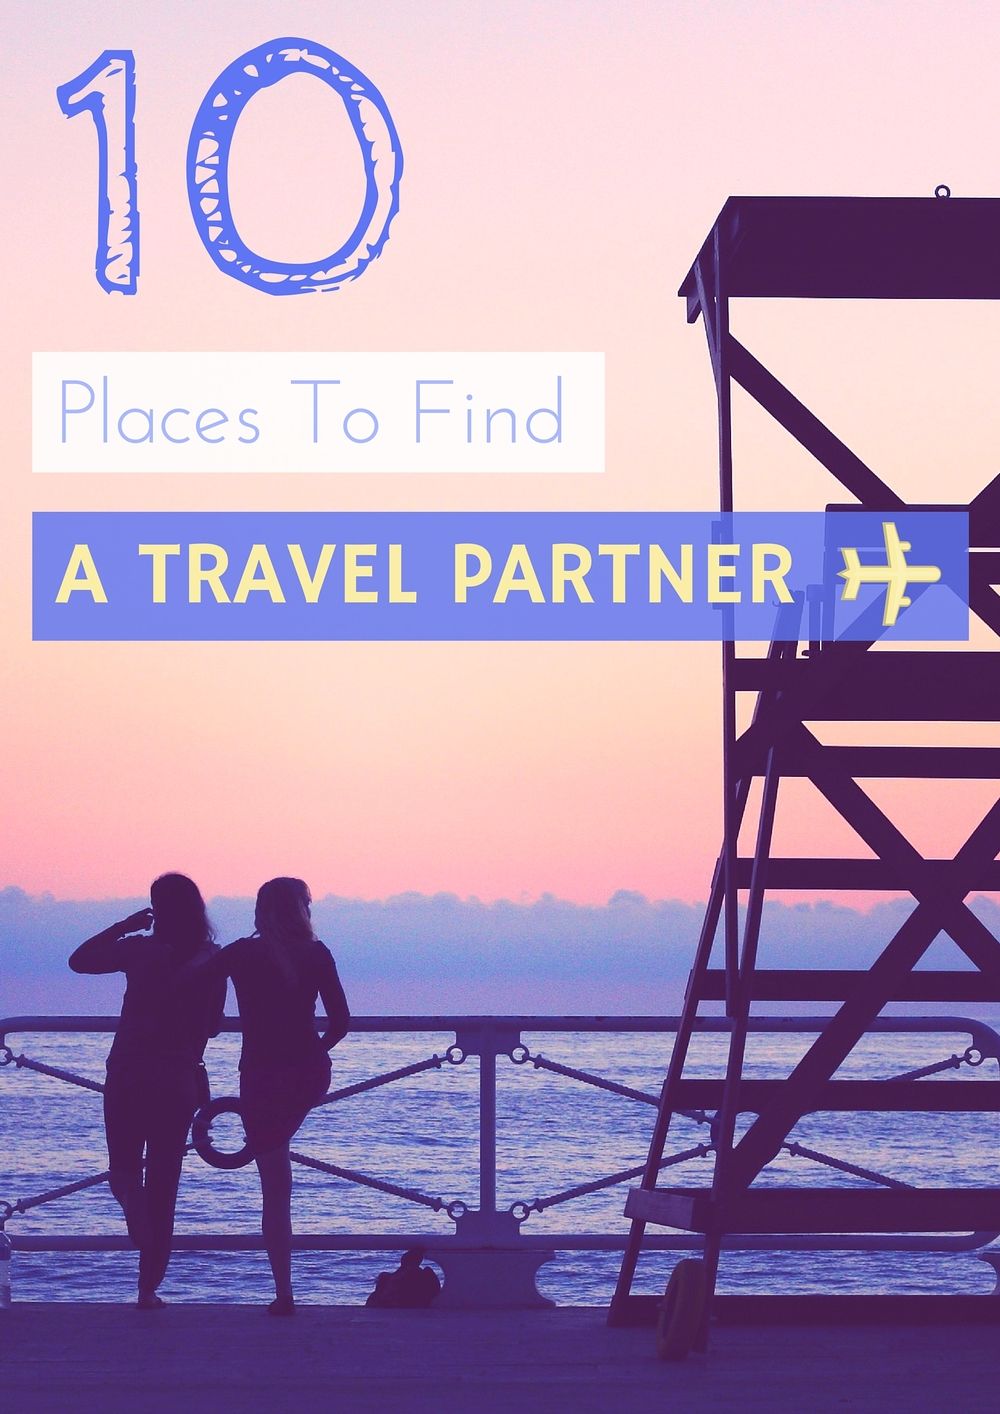 10 Places To Find A Travel Partner (With images)